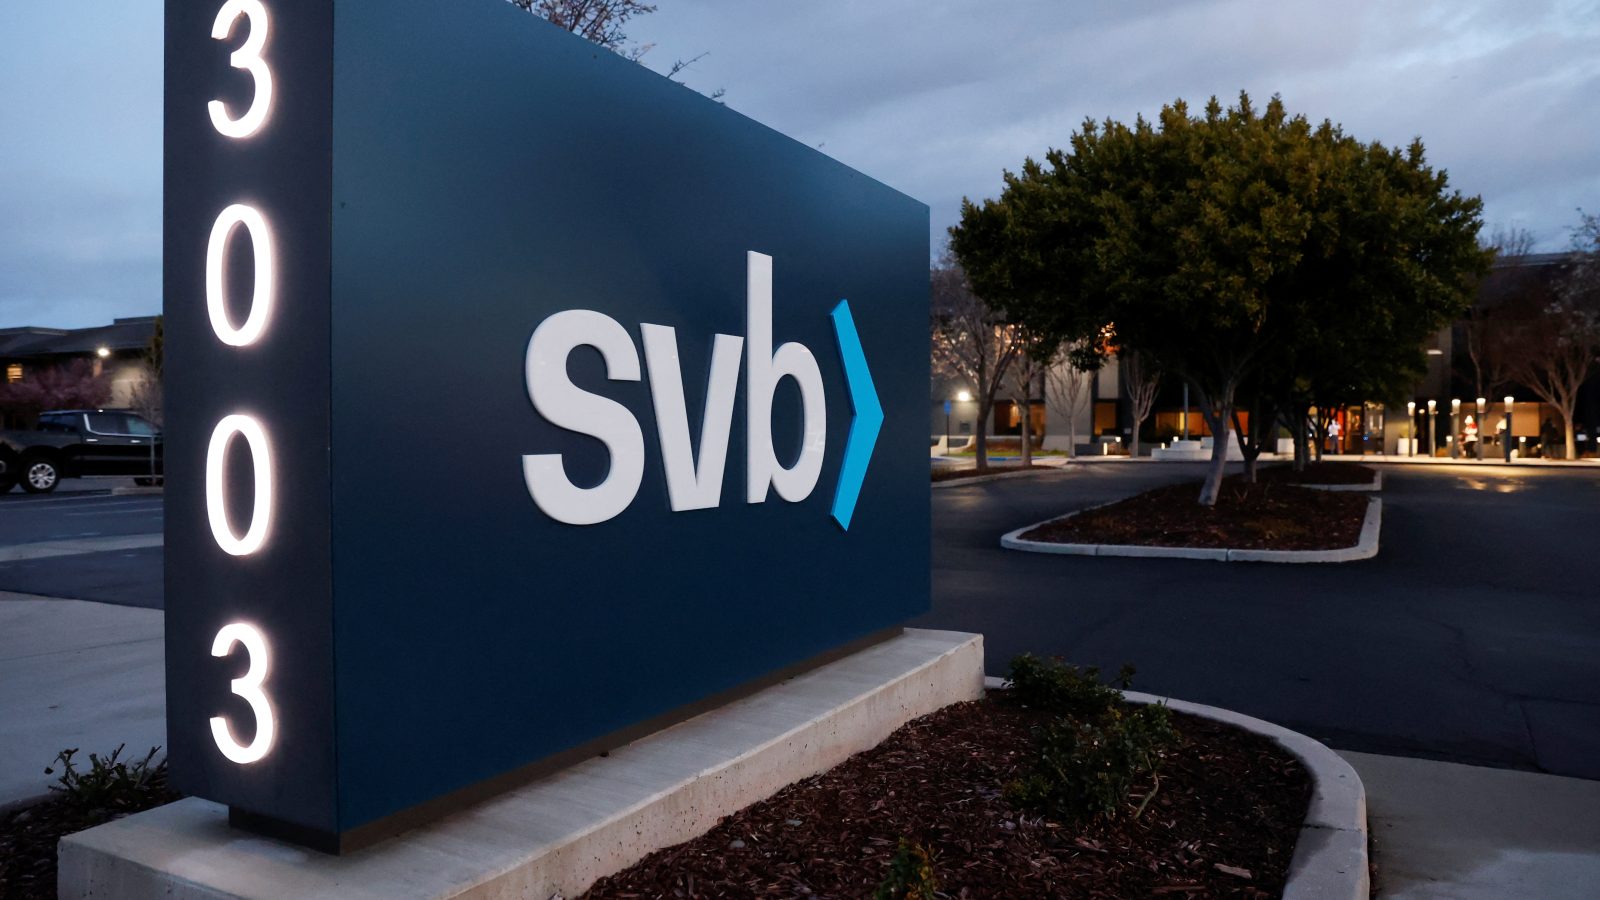 Investors told Latin American startups to bank with SVB. Then it collapsed